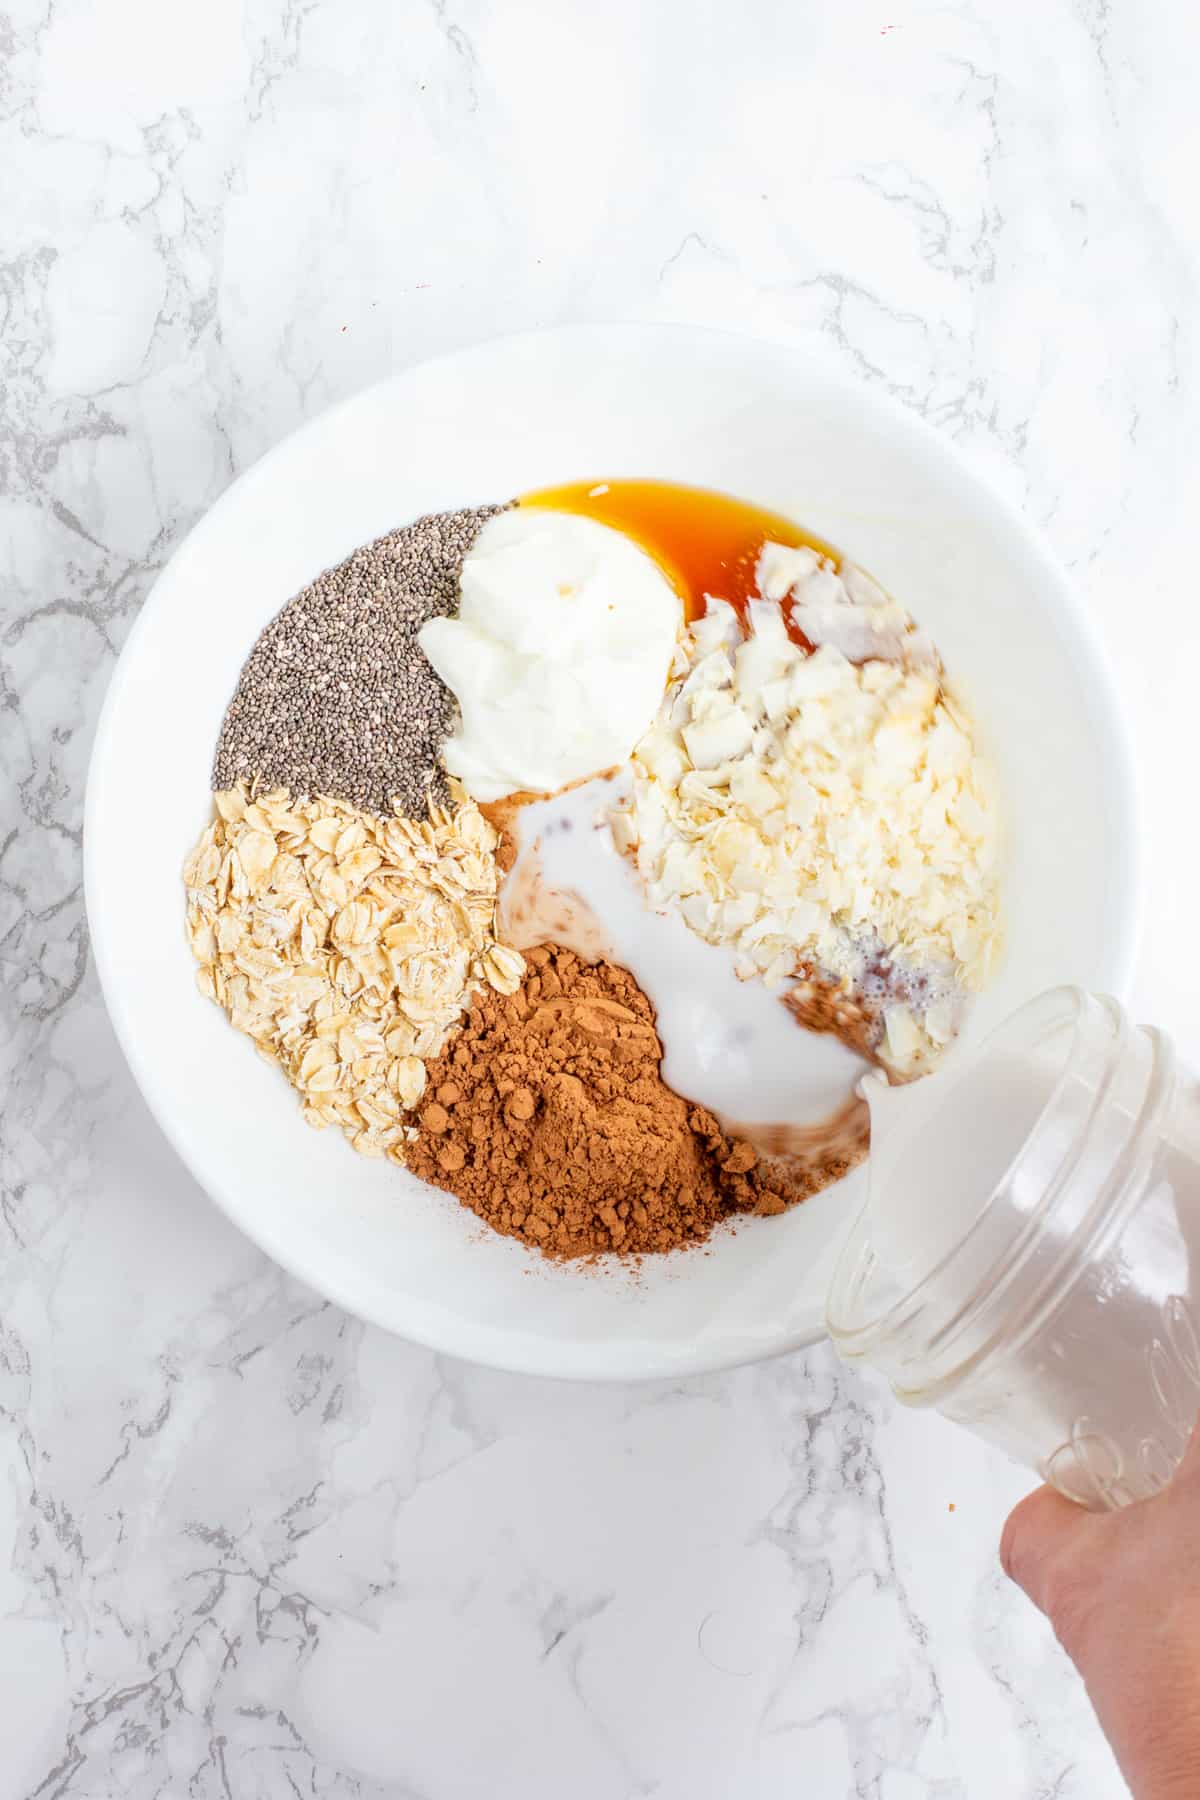 A hand pours coconut milk from a glass jar into a white bowl. The white bowl is filled with other ingredients, including yogurt, cocoa powder, coconut, maple syrup, chia seeds, and rolled oats.